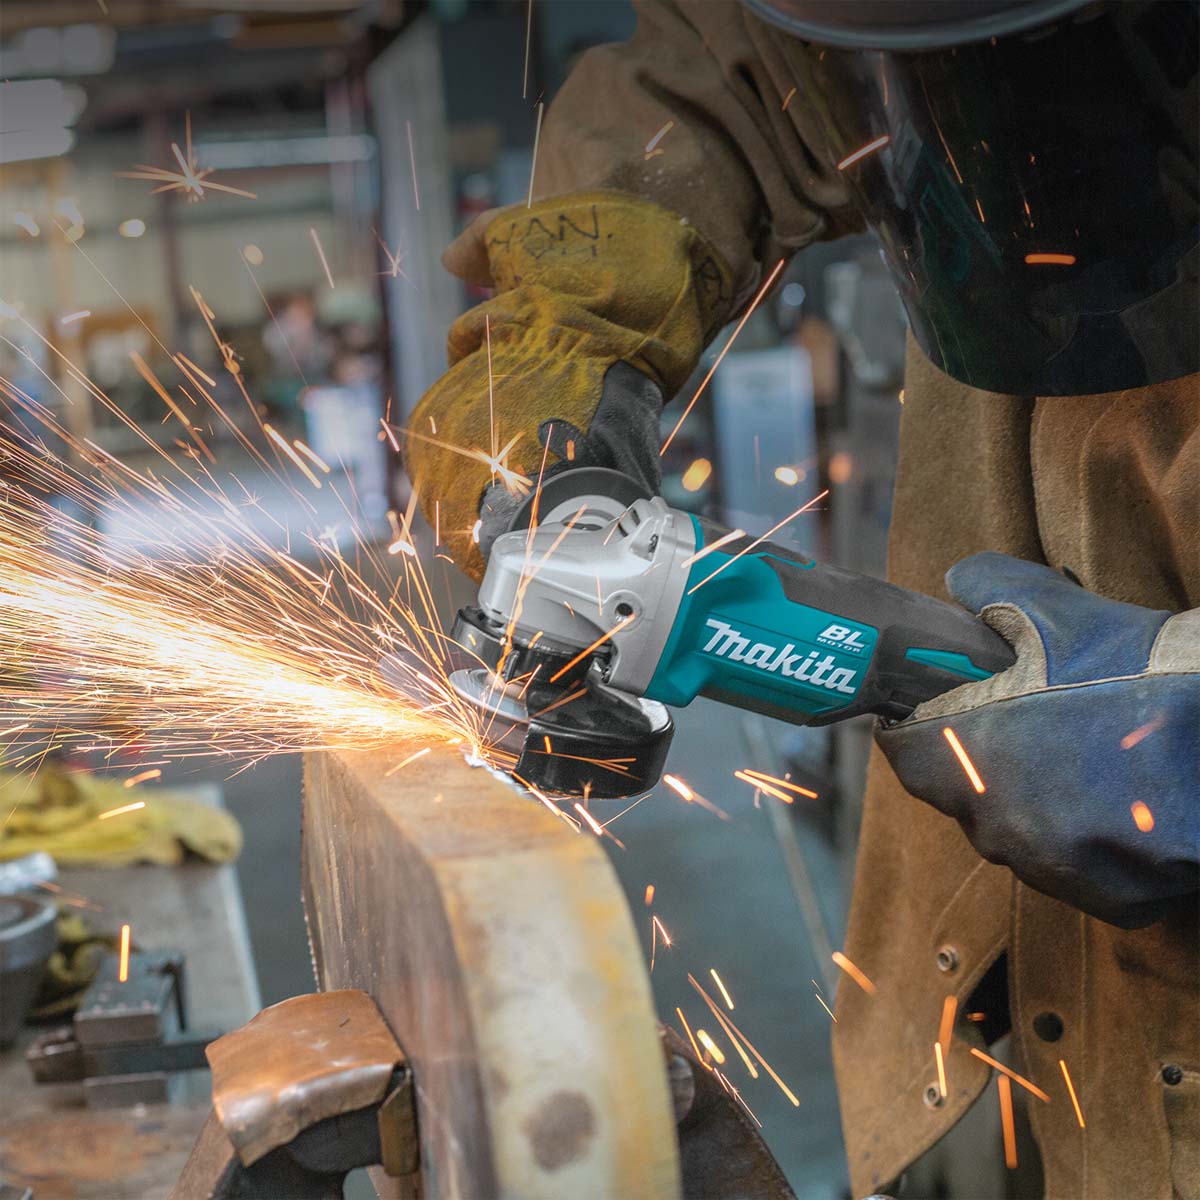 18V 125mm Brushless Angle Grinder Bare (Tool Only) DGA505Z by Makita